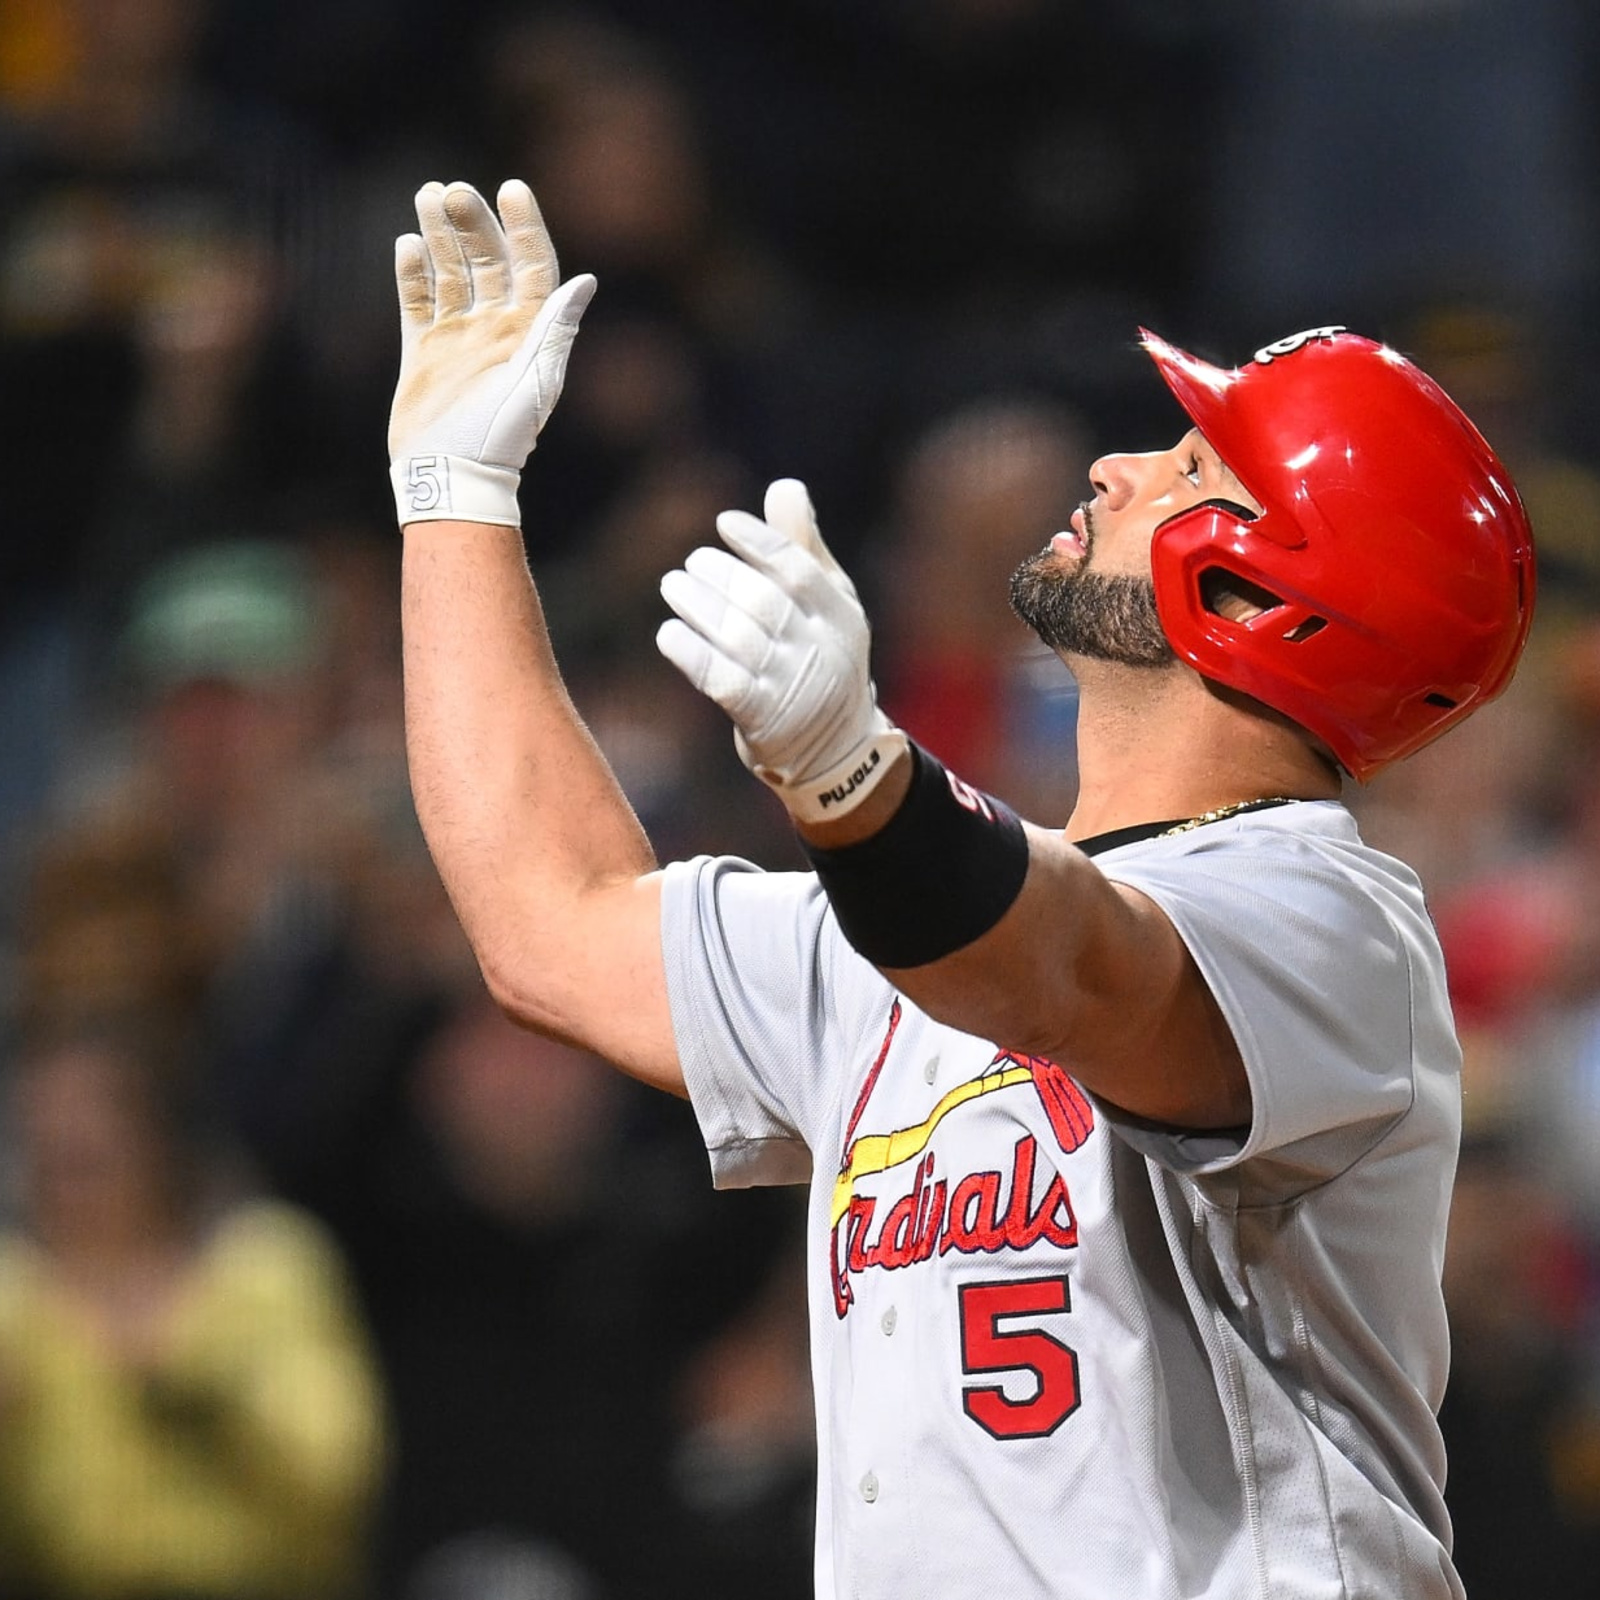 MLB Legend: Albert Pujols returns to the St Louis Cardinals for